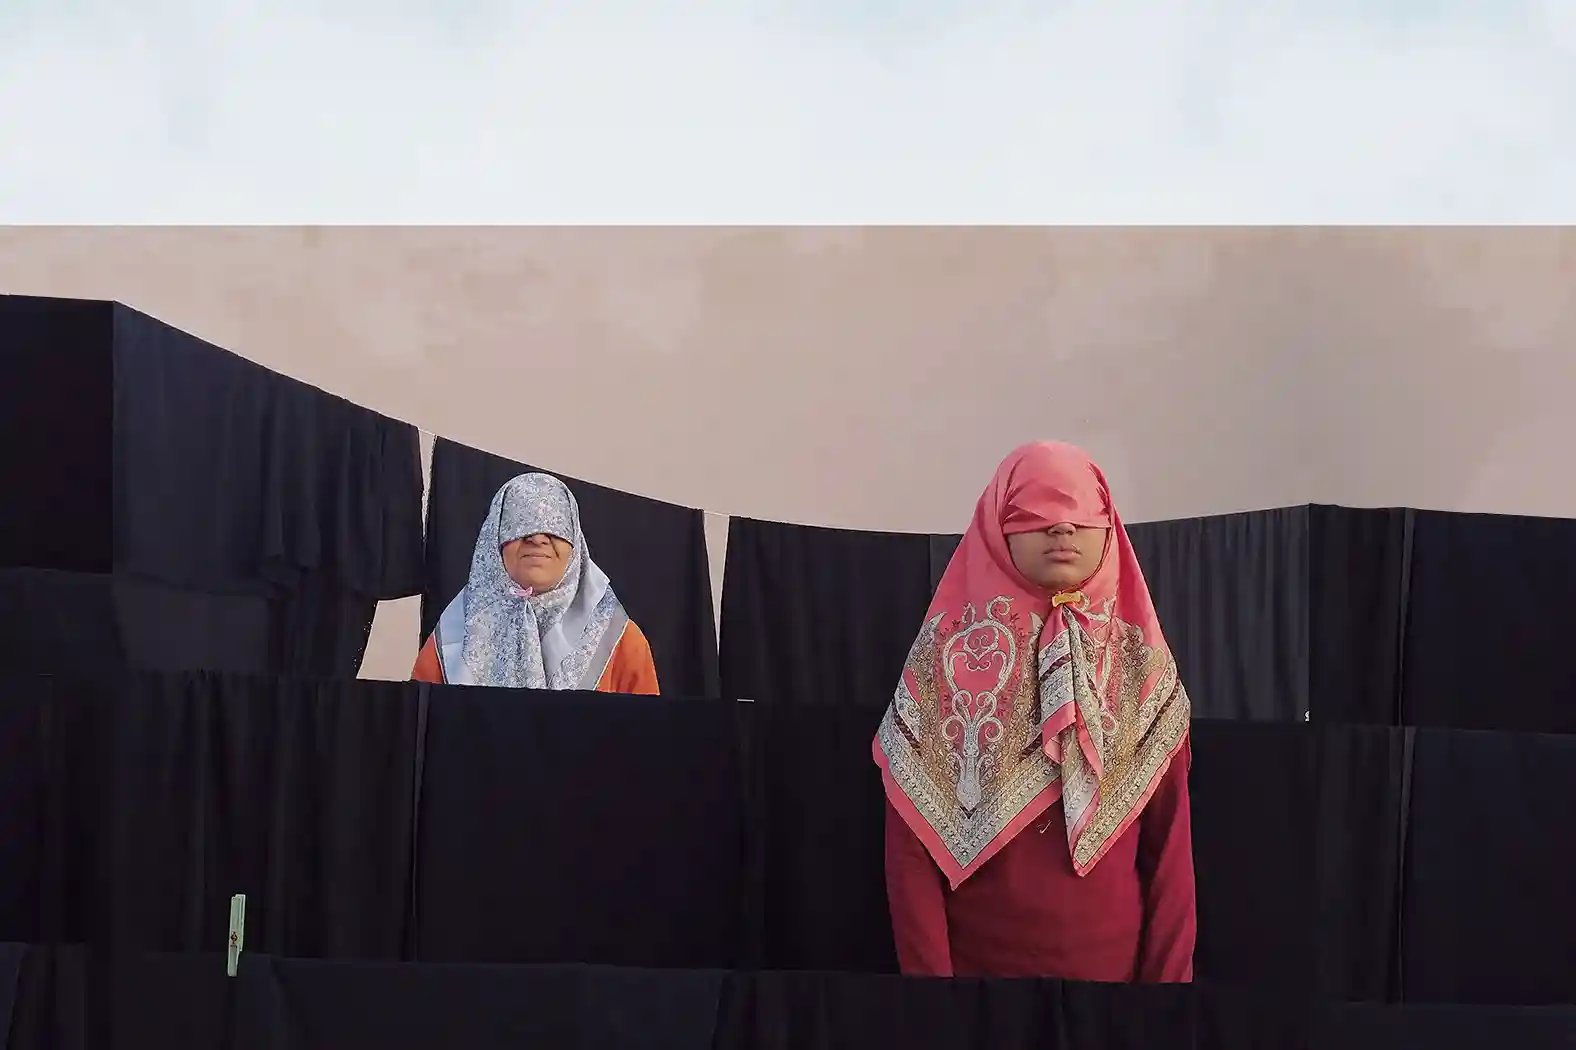 Family Values from Ismail Zaidy, in collaboration with Mâat Gallery